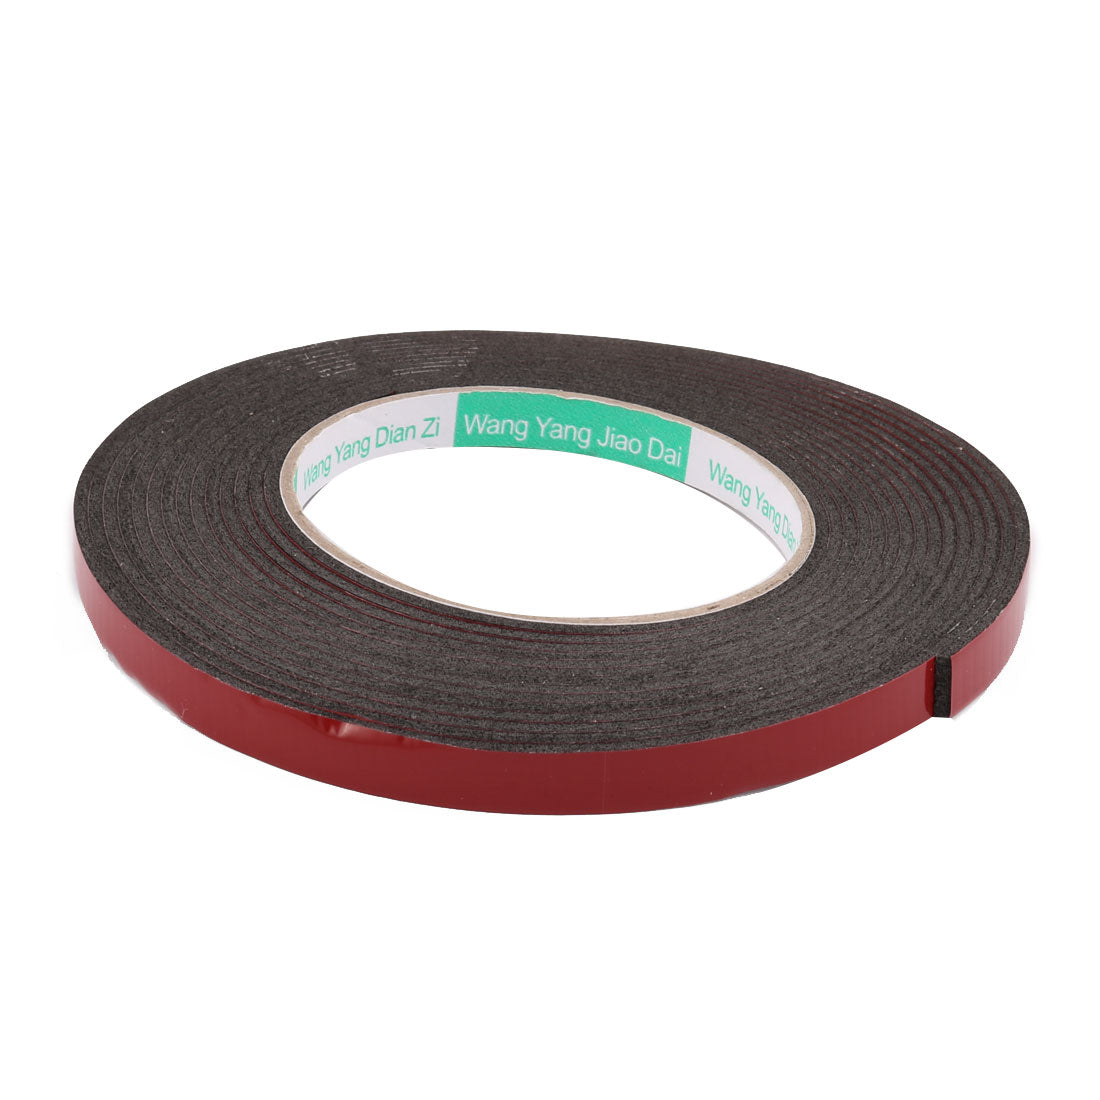 uxcell Uxcell 10mmx2mm Red Double Sided Sponge Tape Adhesive Sticker Foam Glue Strip 5M Length